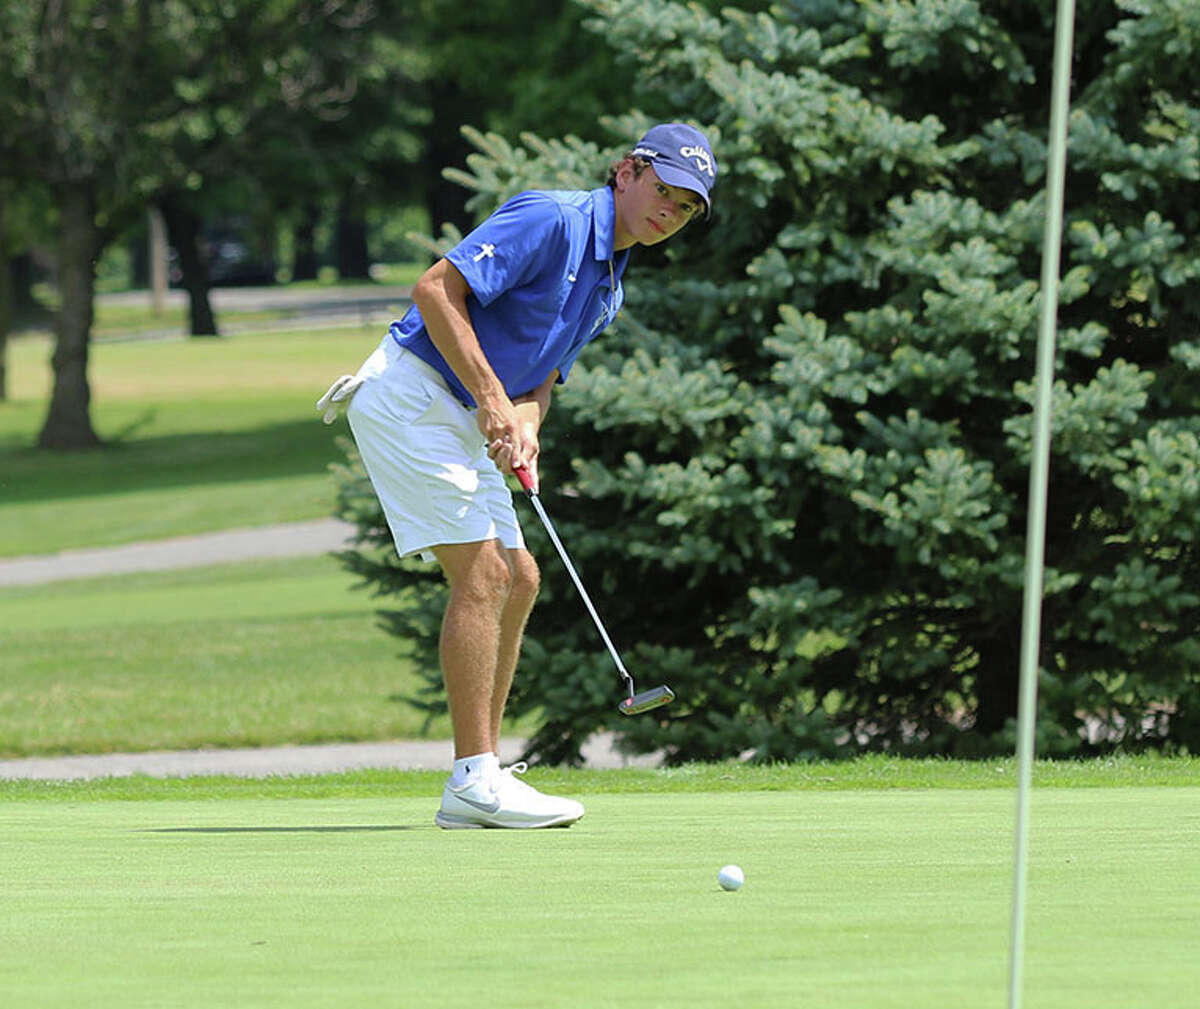 Marquette Catholic senior Will Schwartz watches his putt roll toward to the cup on hole No. 2 at Belk Park on Thursday in the Madison County Tournament in Wood River. Schwartz was small-schools runner-up with a 74.